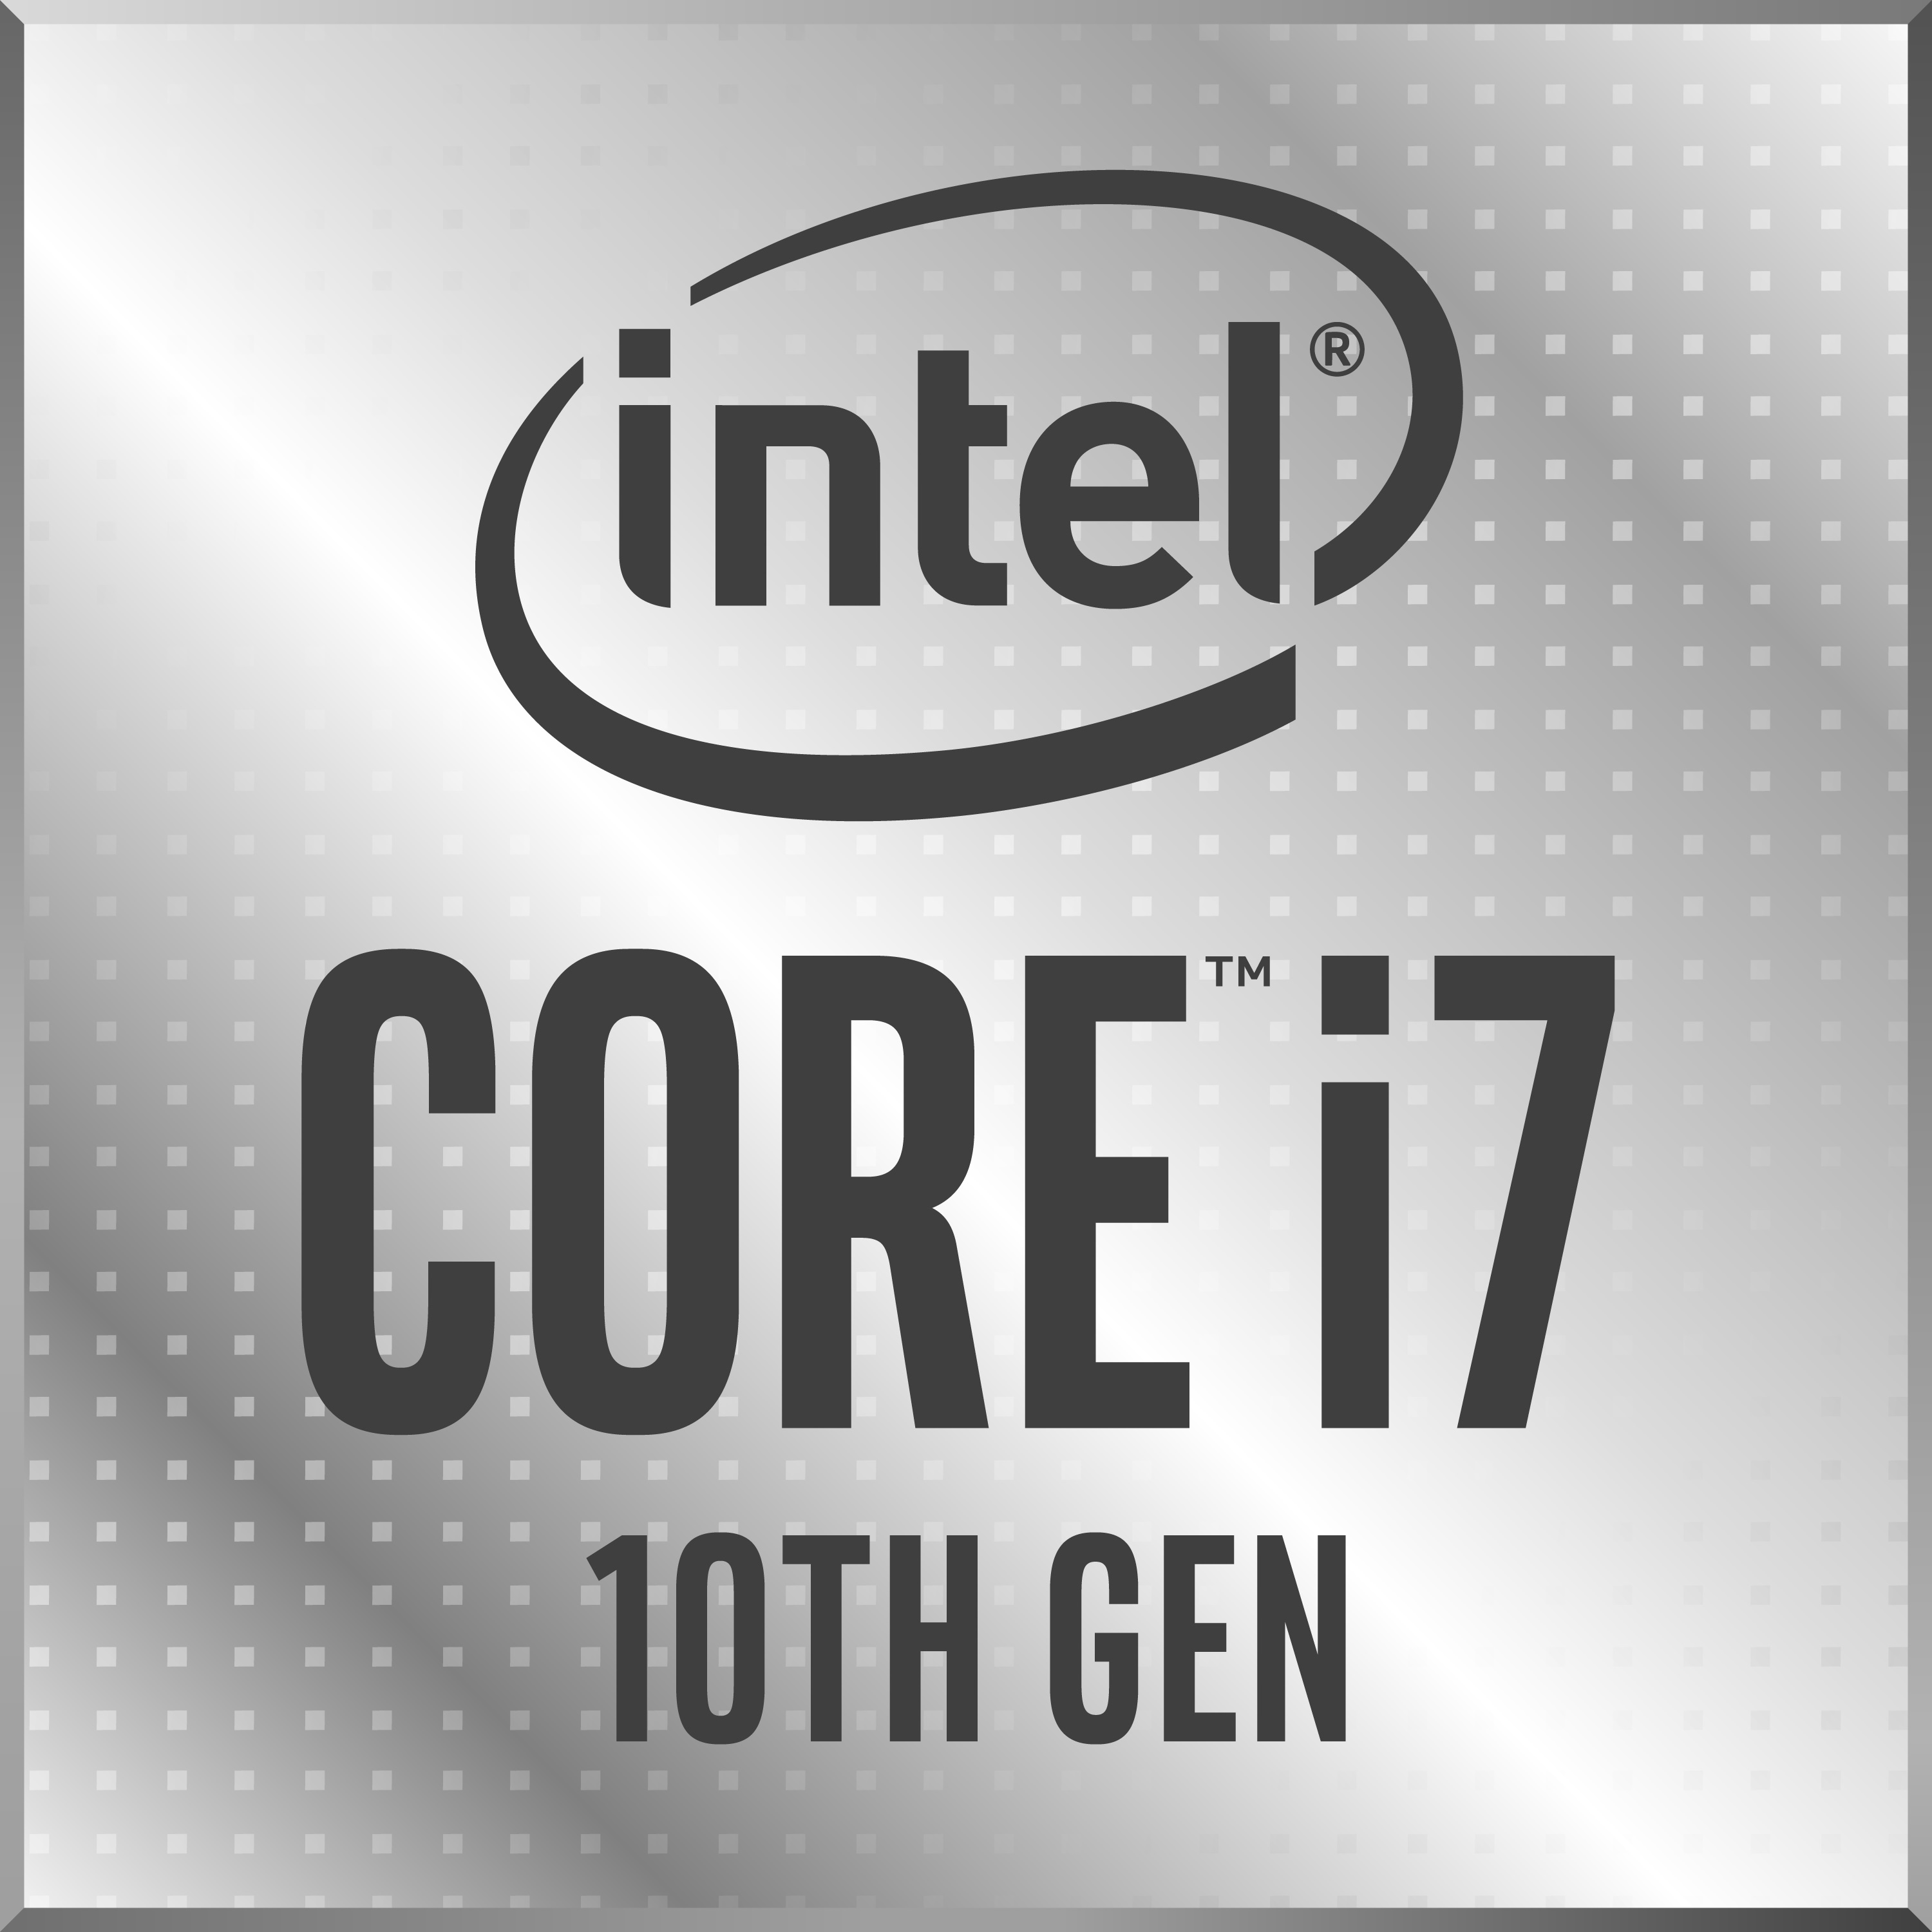 intel s procs that end in g